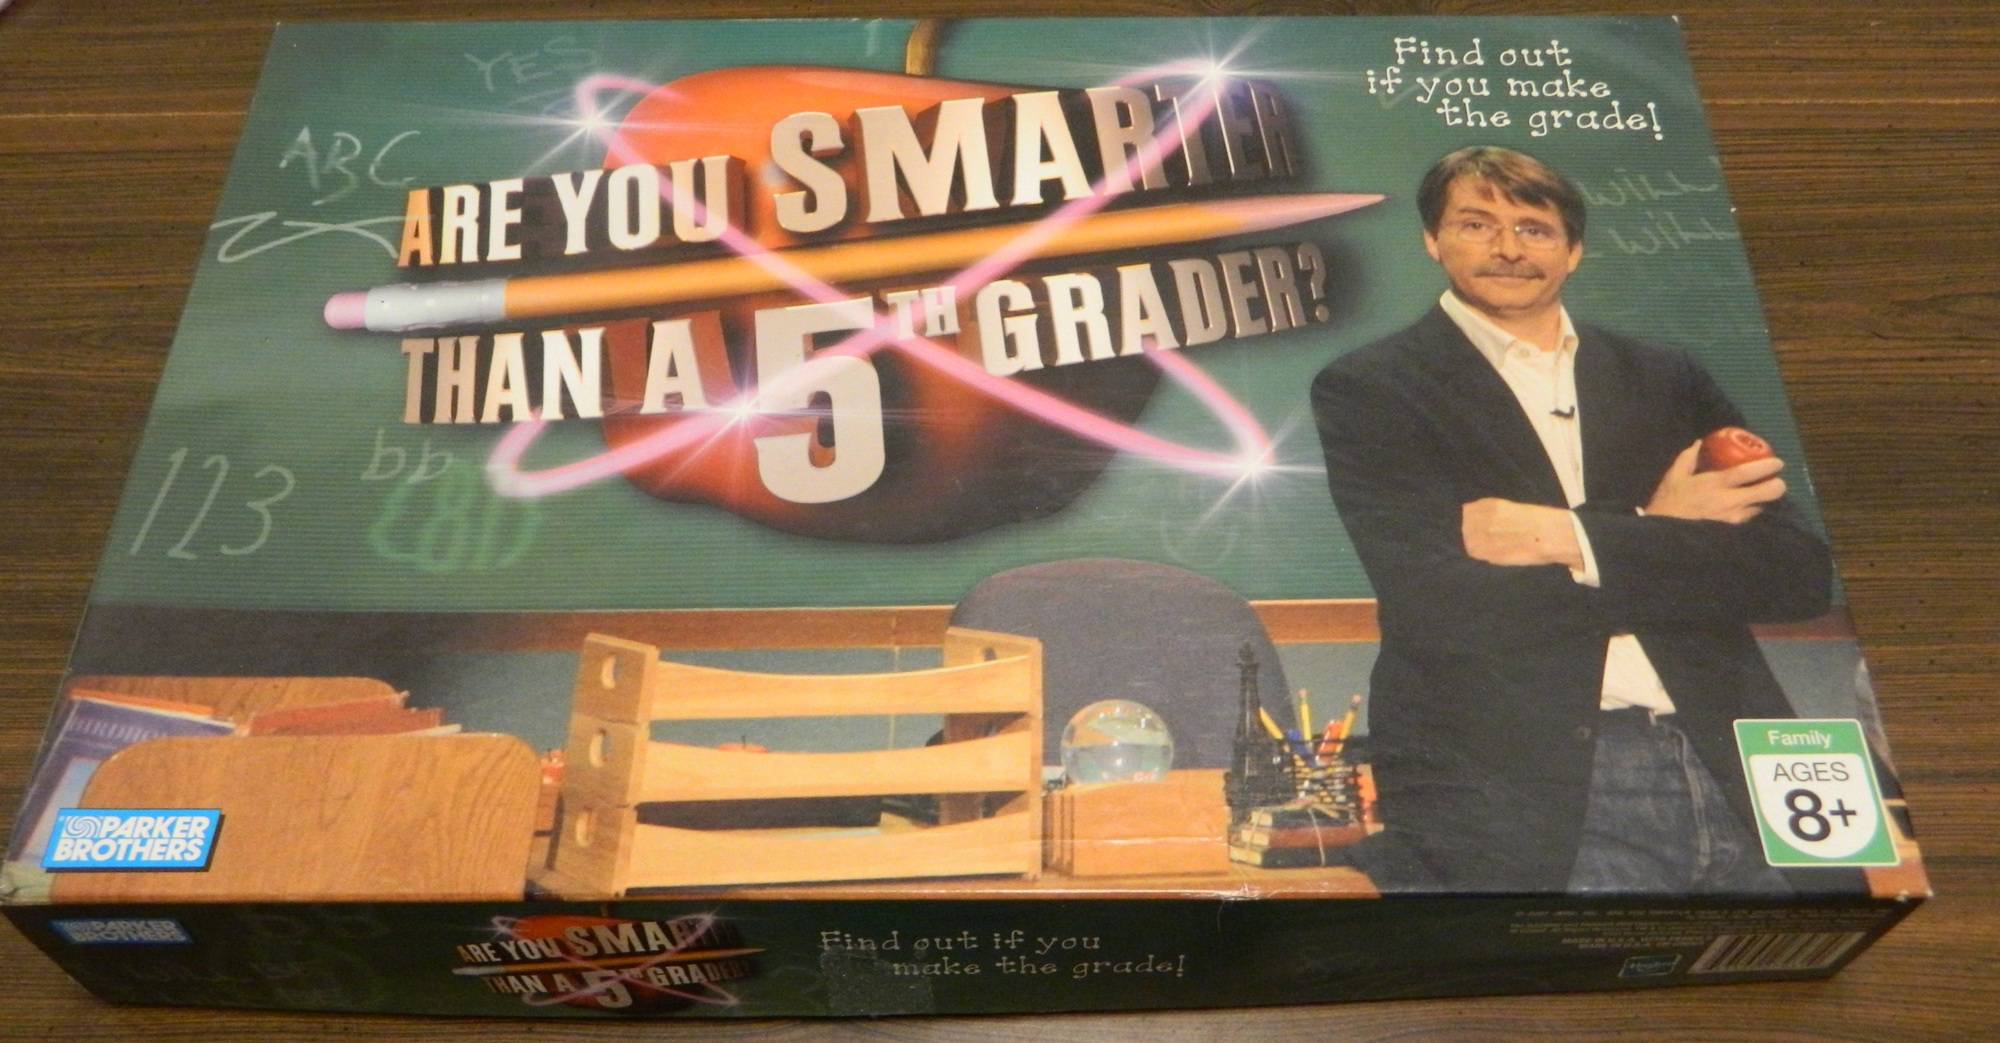 Are You Smarter Than A 5th Grader? Board Game Review and Rules